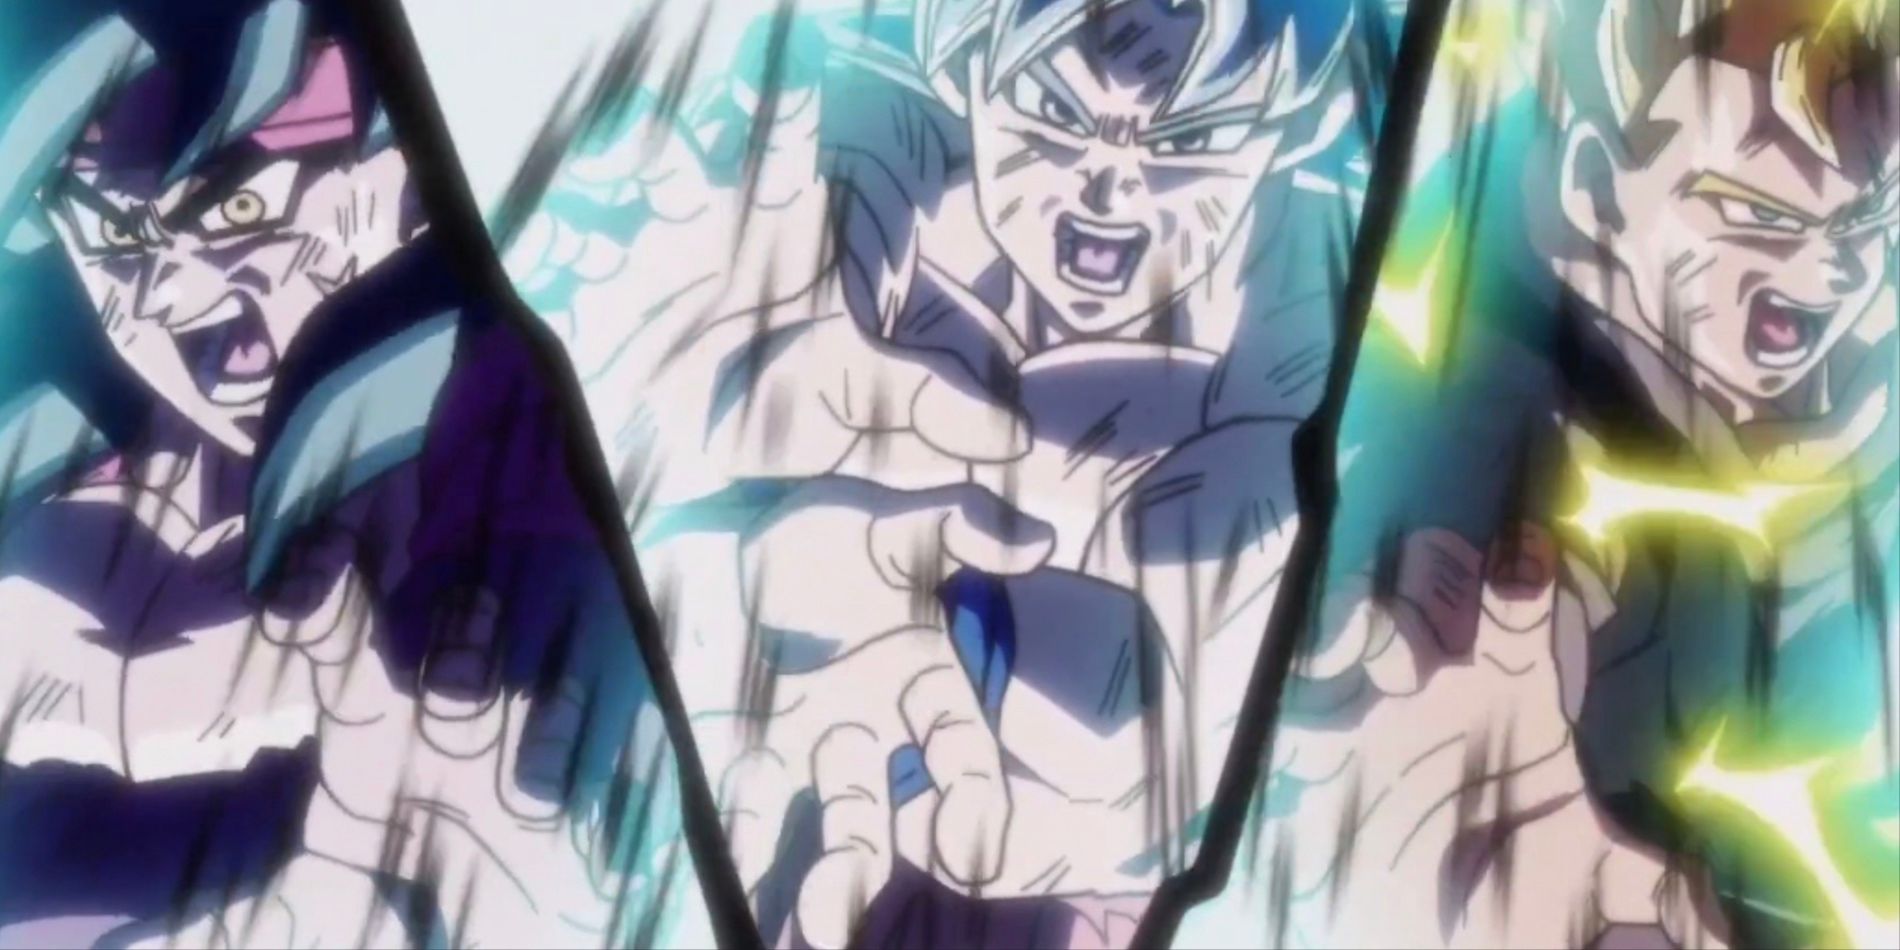 Xeno Bardock, Goku, and Future Gohan fight against Demigra in Super Dragon Ball Heroes.